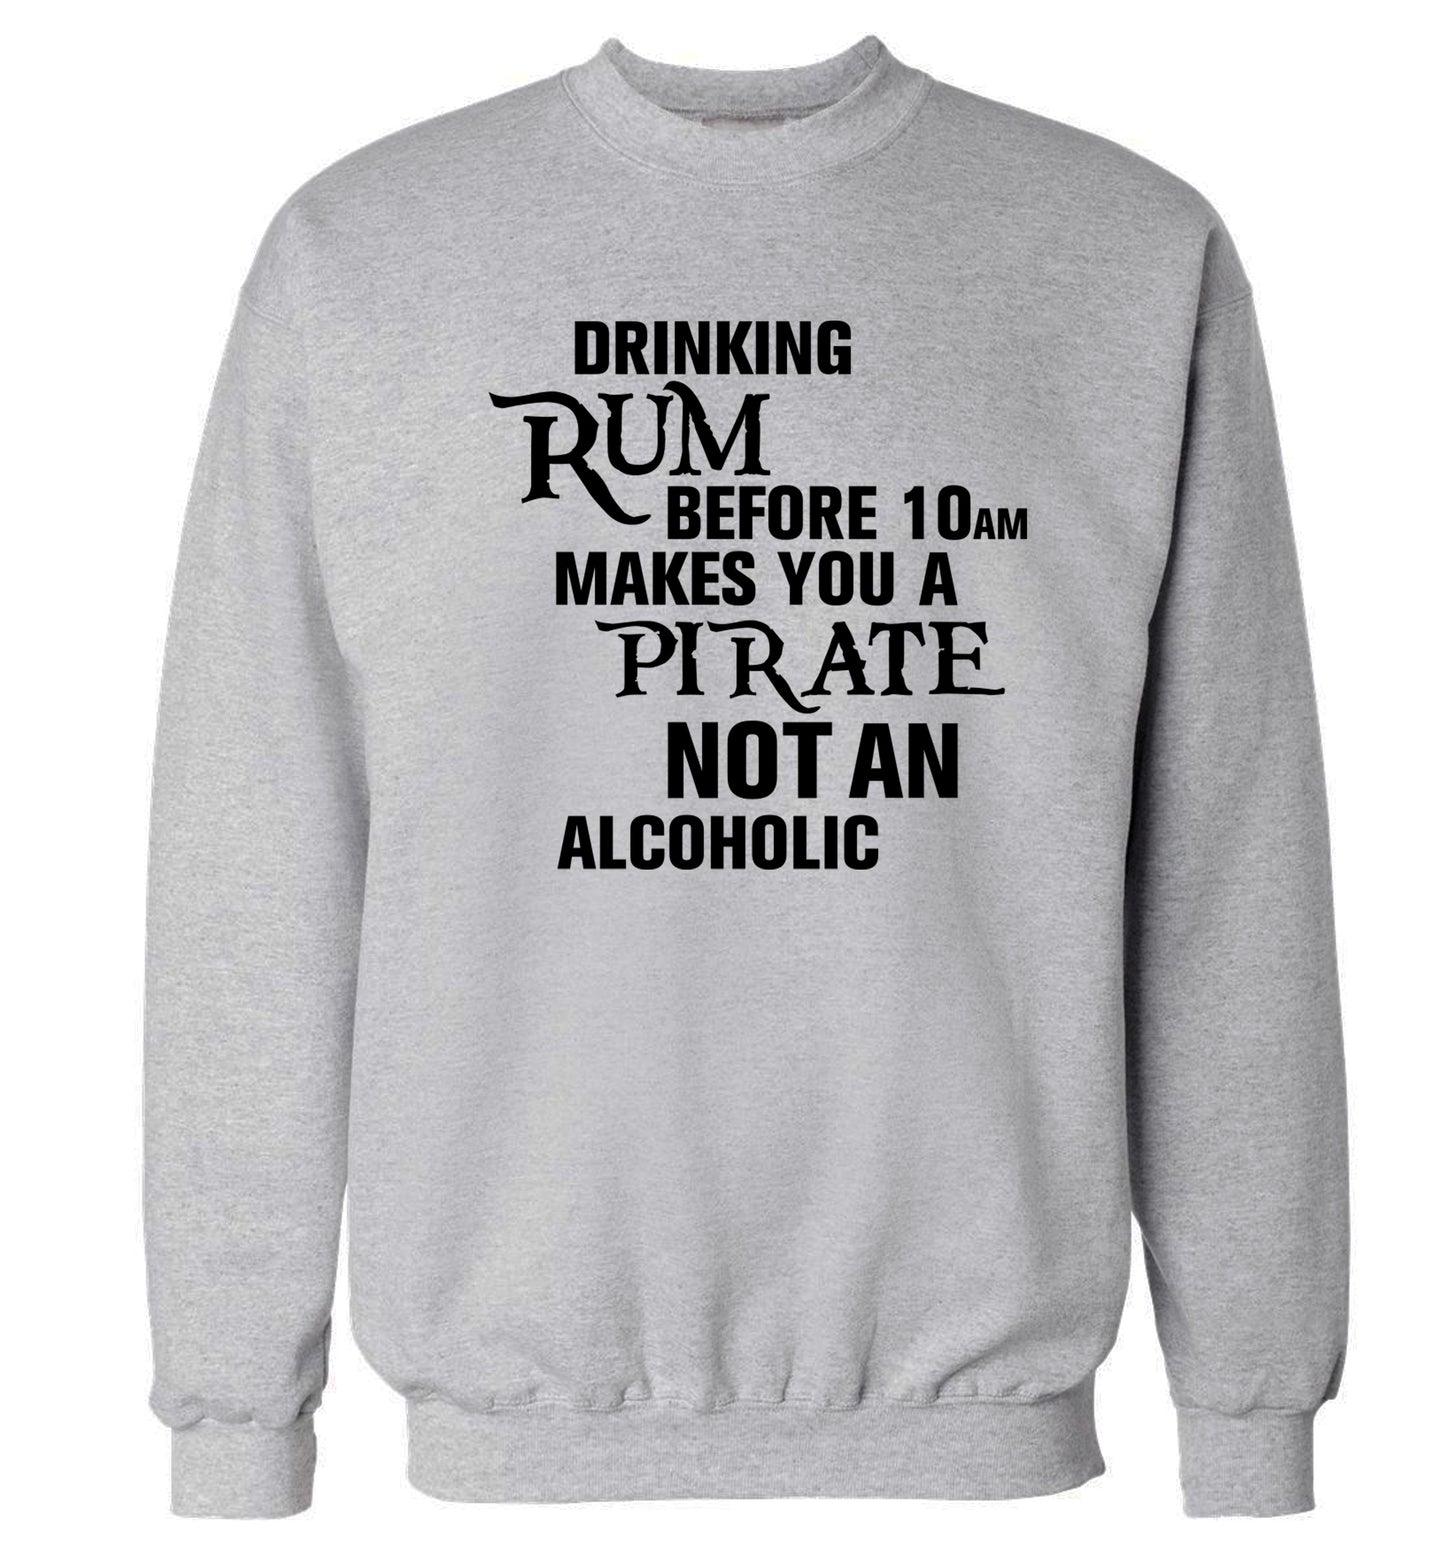 Drinking rum before 10AM makes you a pirate not an alcoholic Adult's unisex grey Sweater 2XL